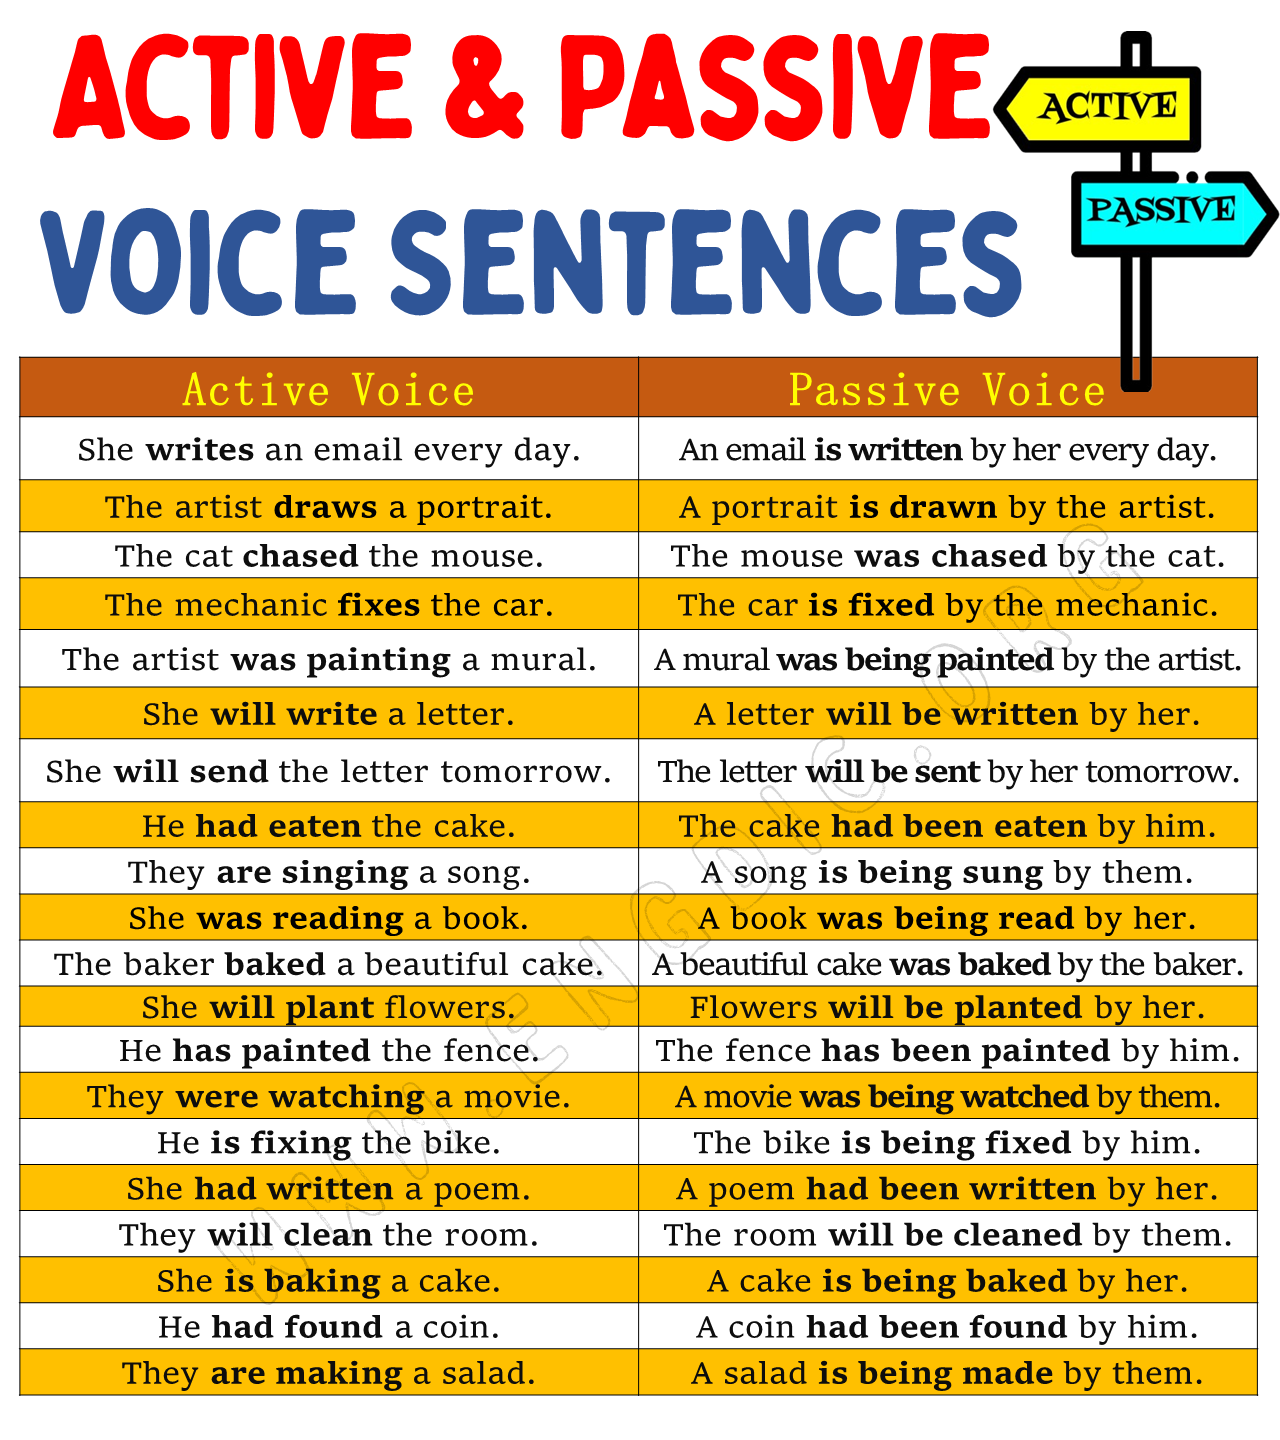 Sentences of Active and Passive Voice